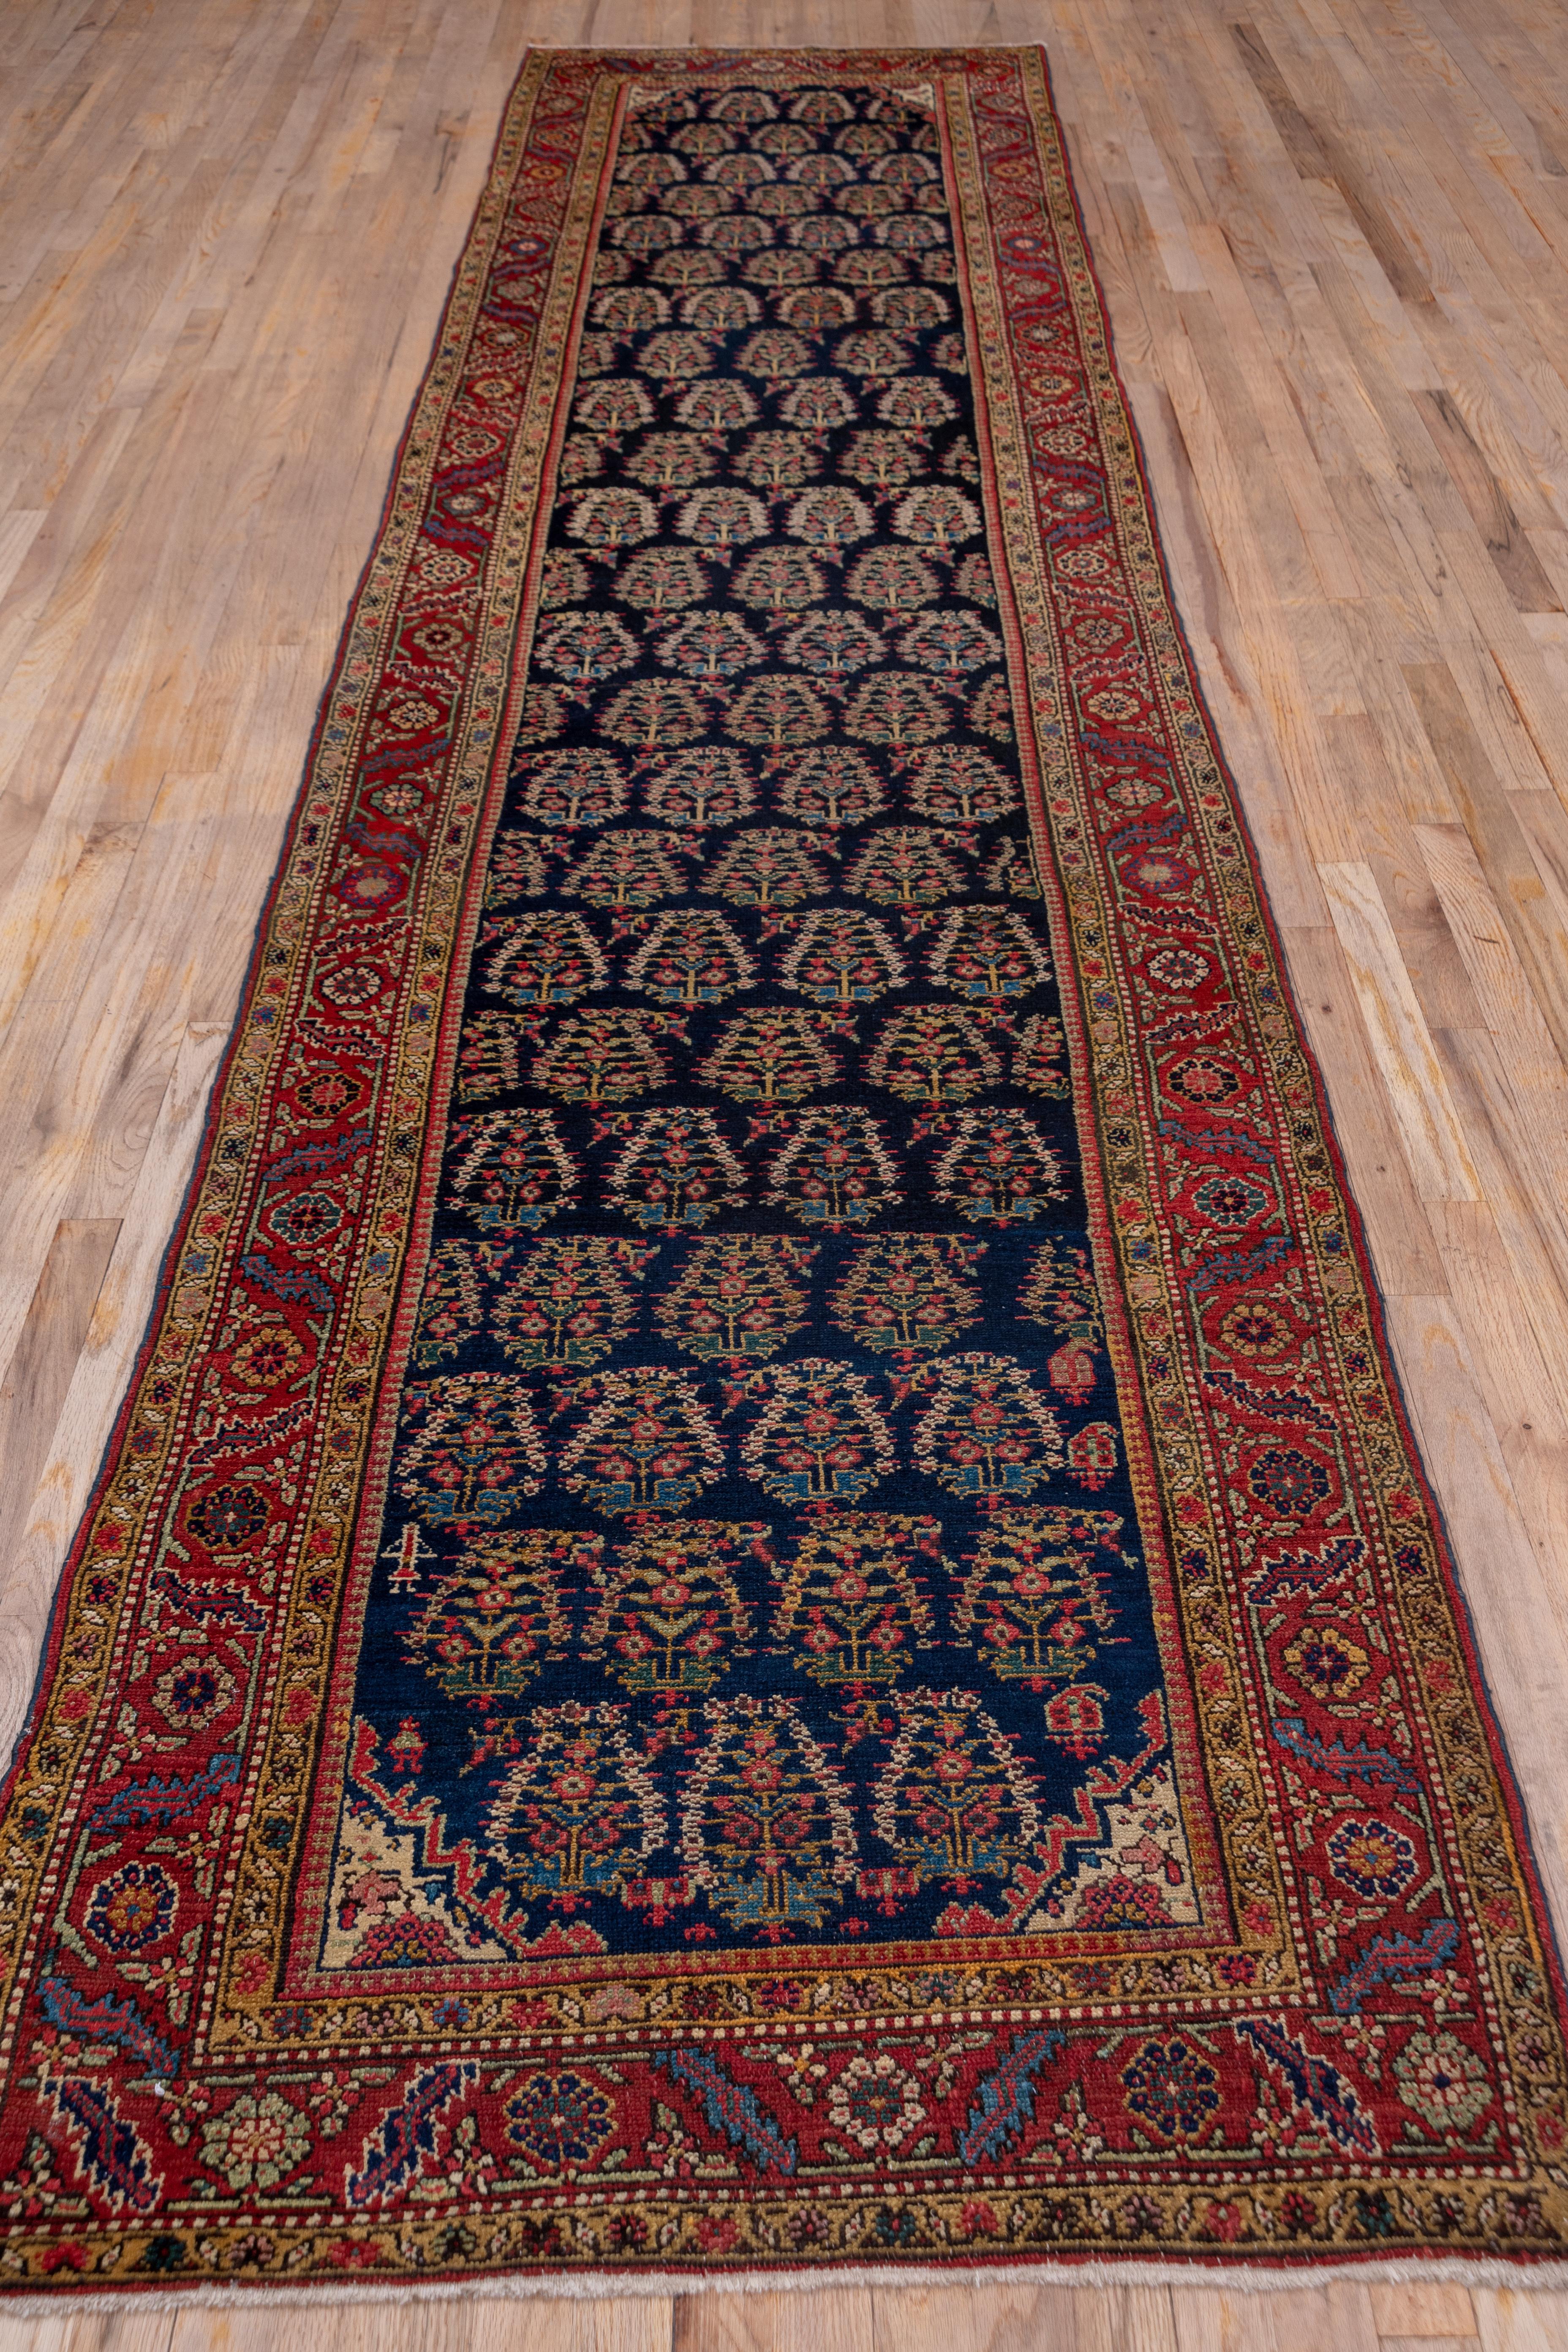 The rich navy field of this rustic Azerbaijani runner displays an offset pattern of row-b-row reversing floriated botehs, with a few lesser cones and a human figure tossed in. Fractional botehs often fill out a row. The red main border employs